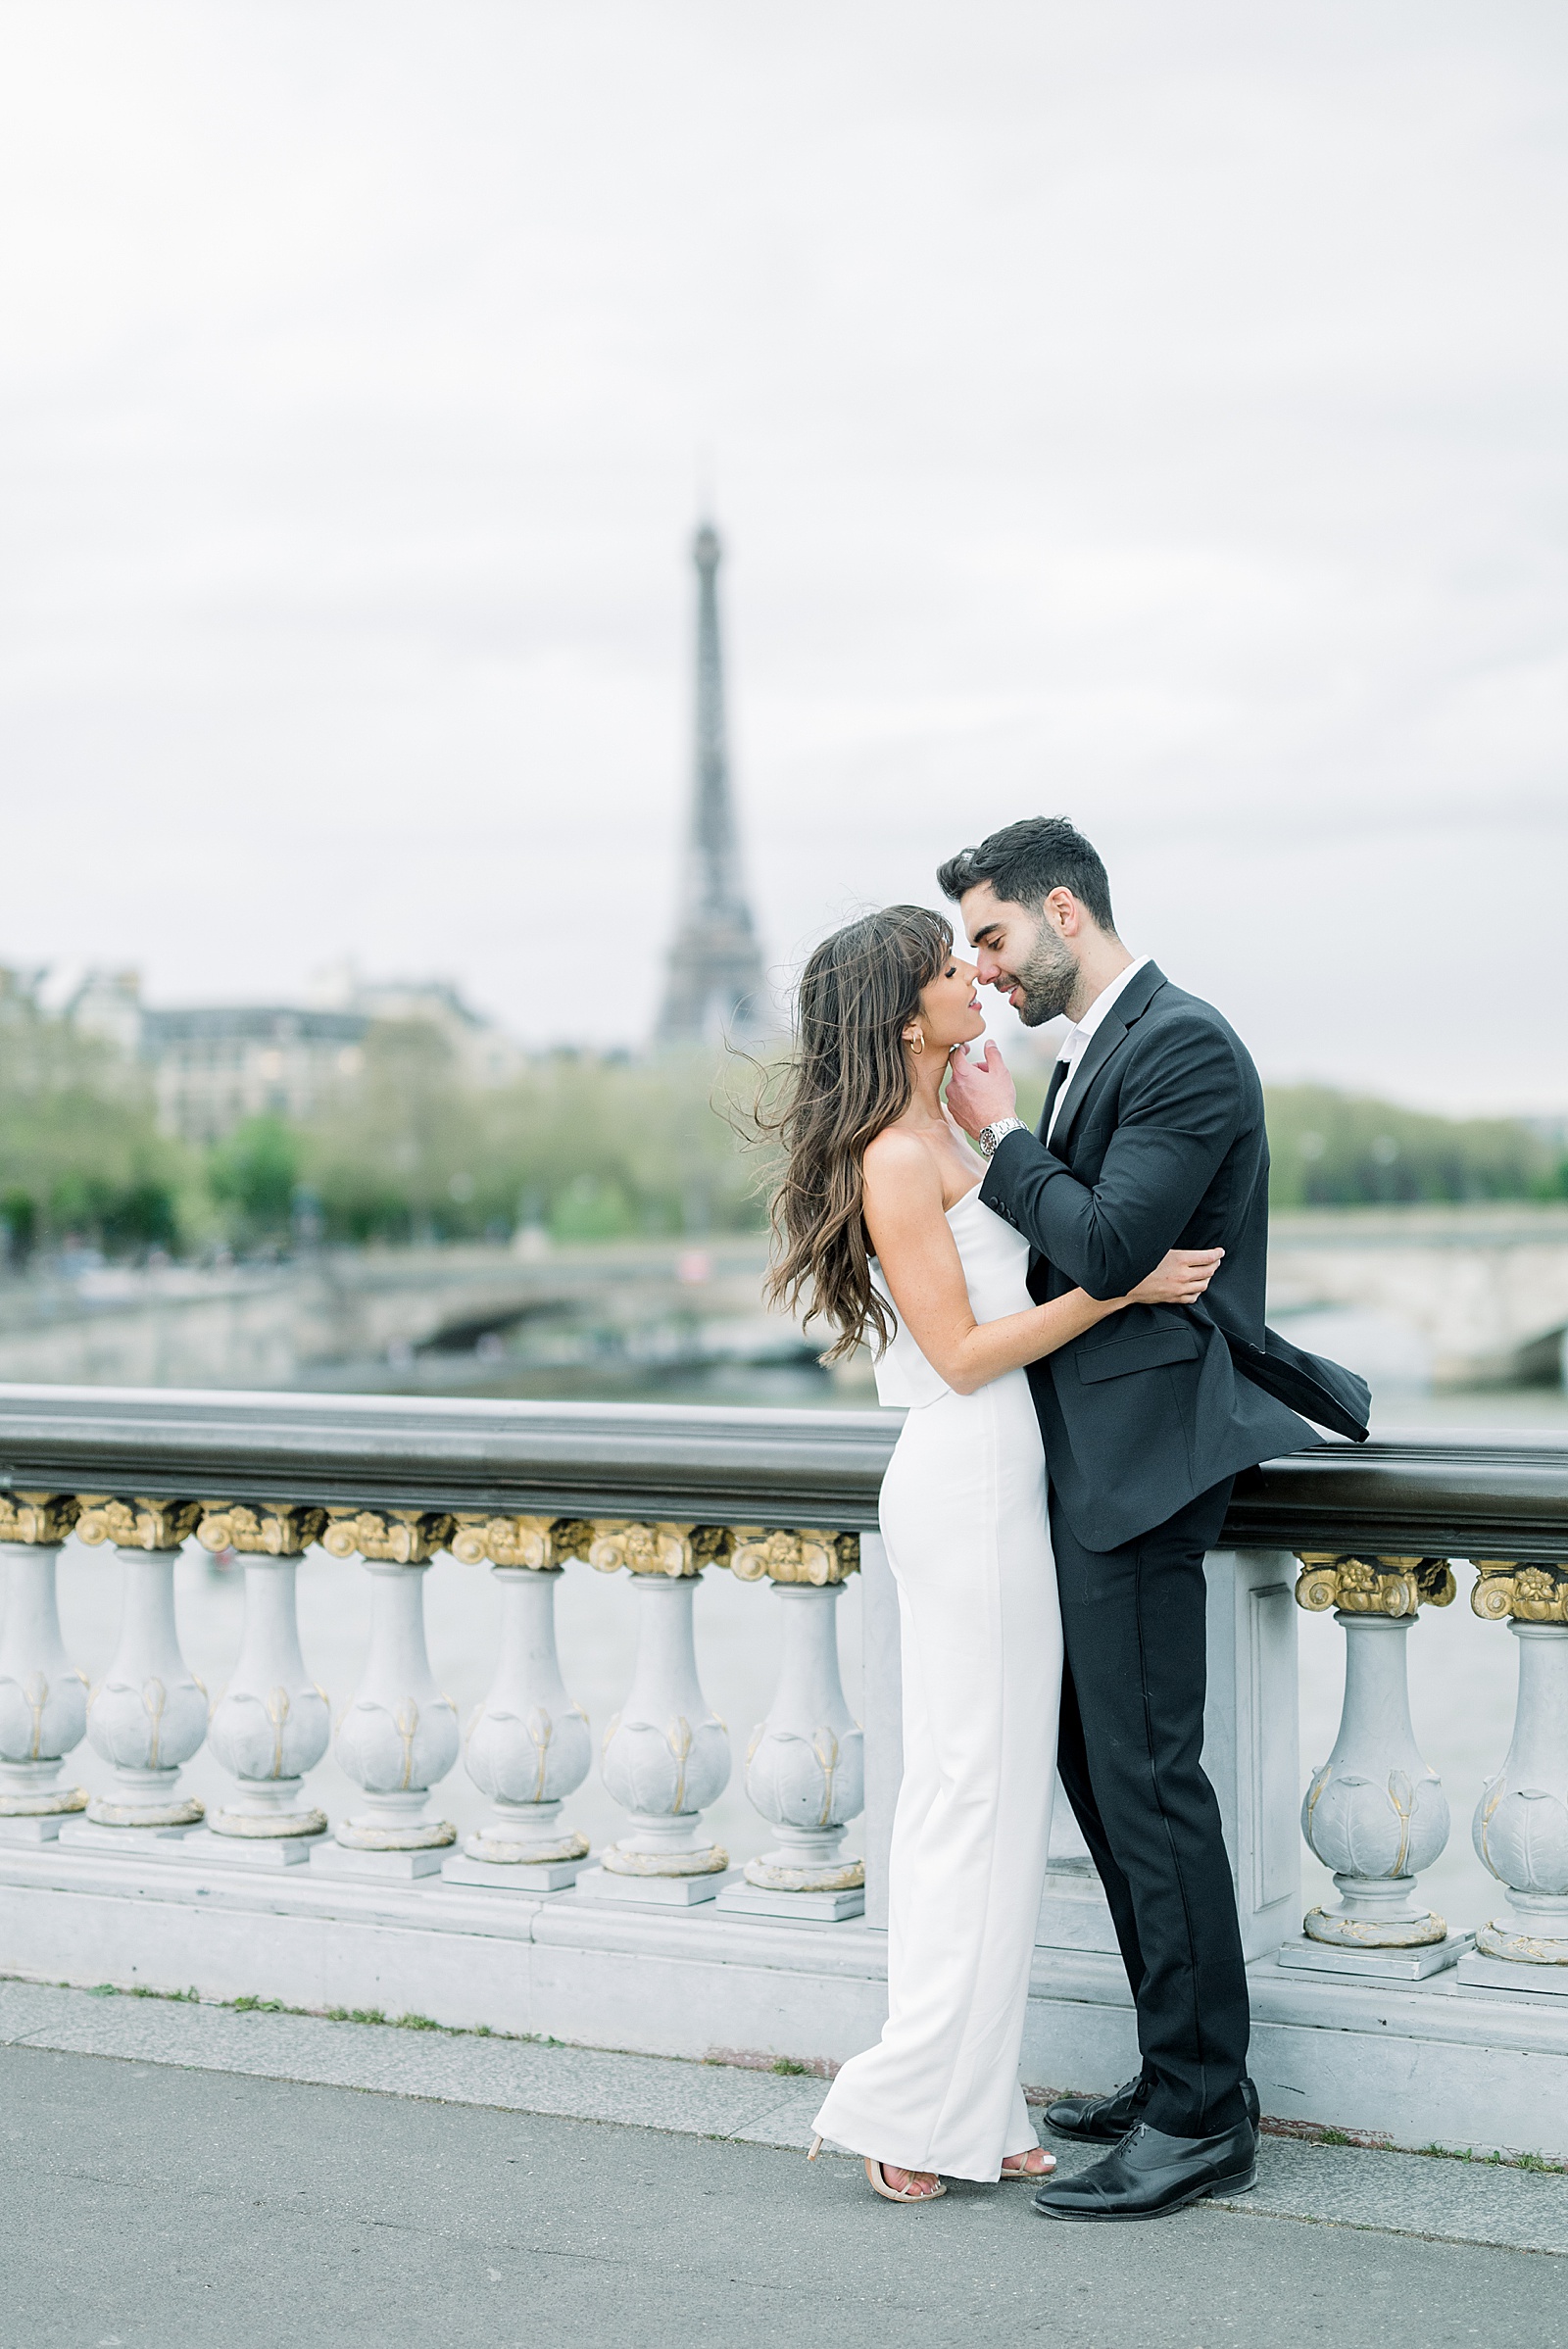 A couple stands on the pont alexandre iii on a windy day with the Eiffel tower in the background